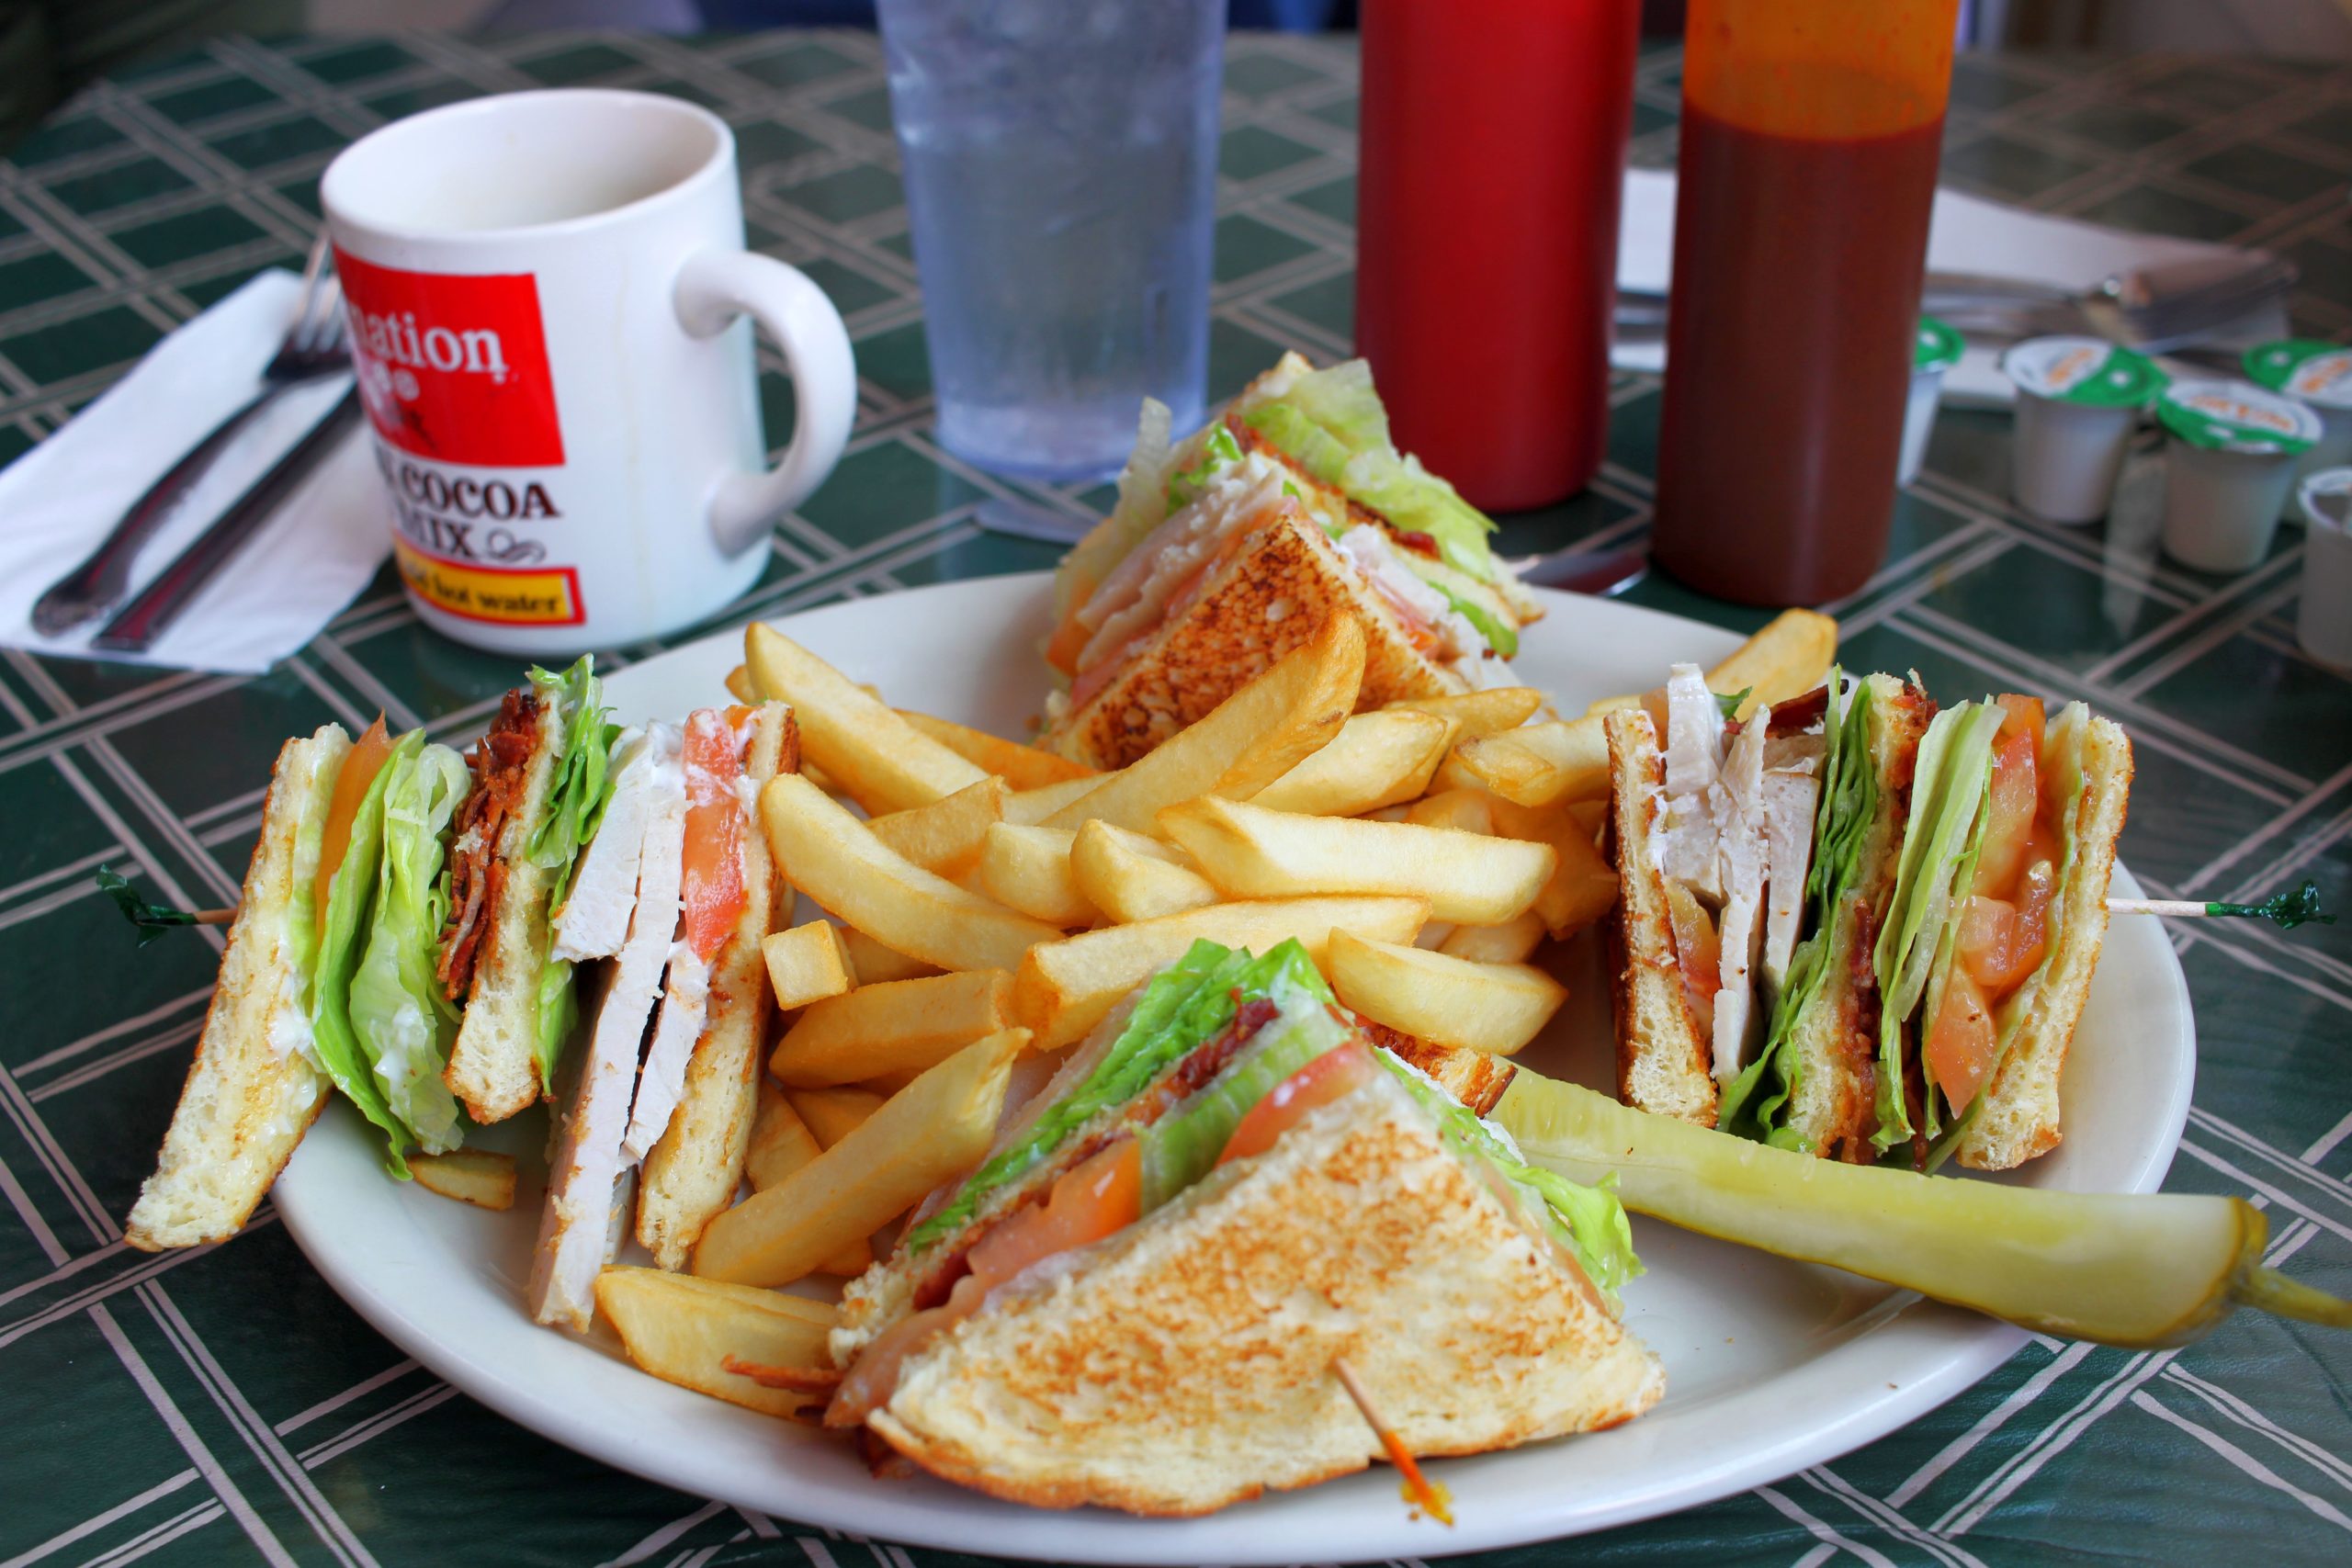 Club Sandwich at Frank's (Photo by Mark Whittaker)